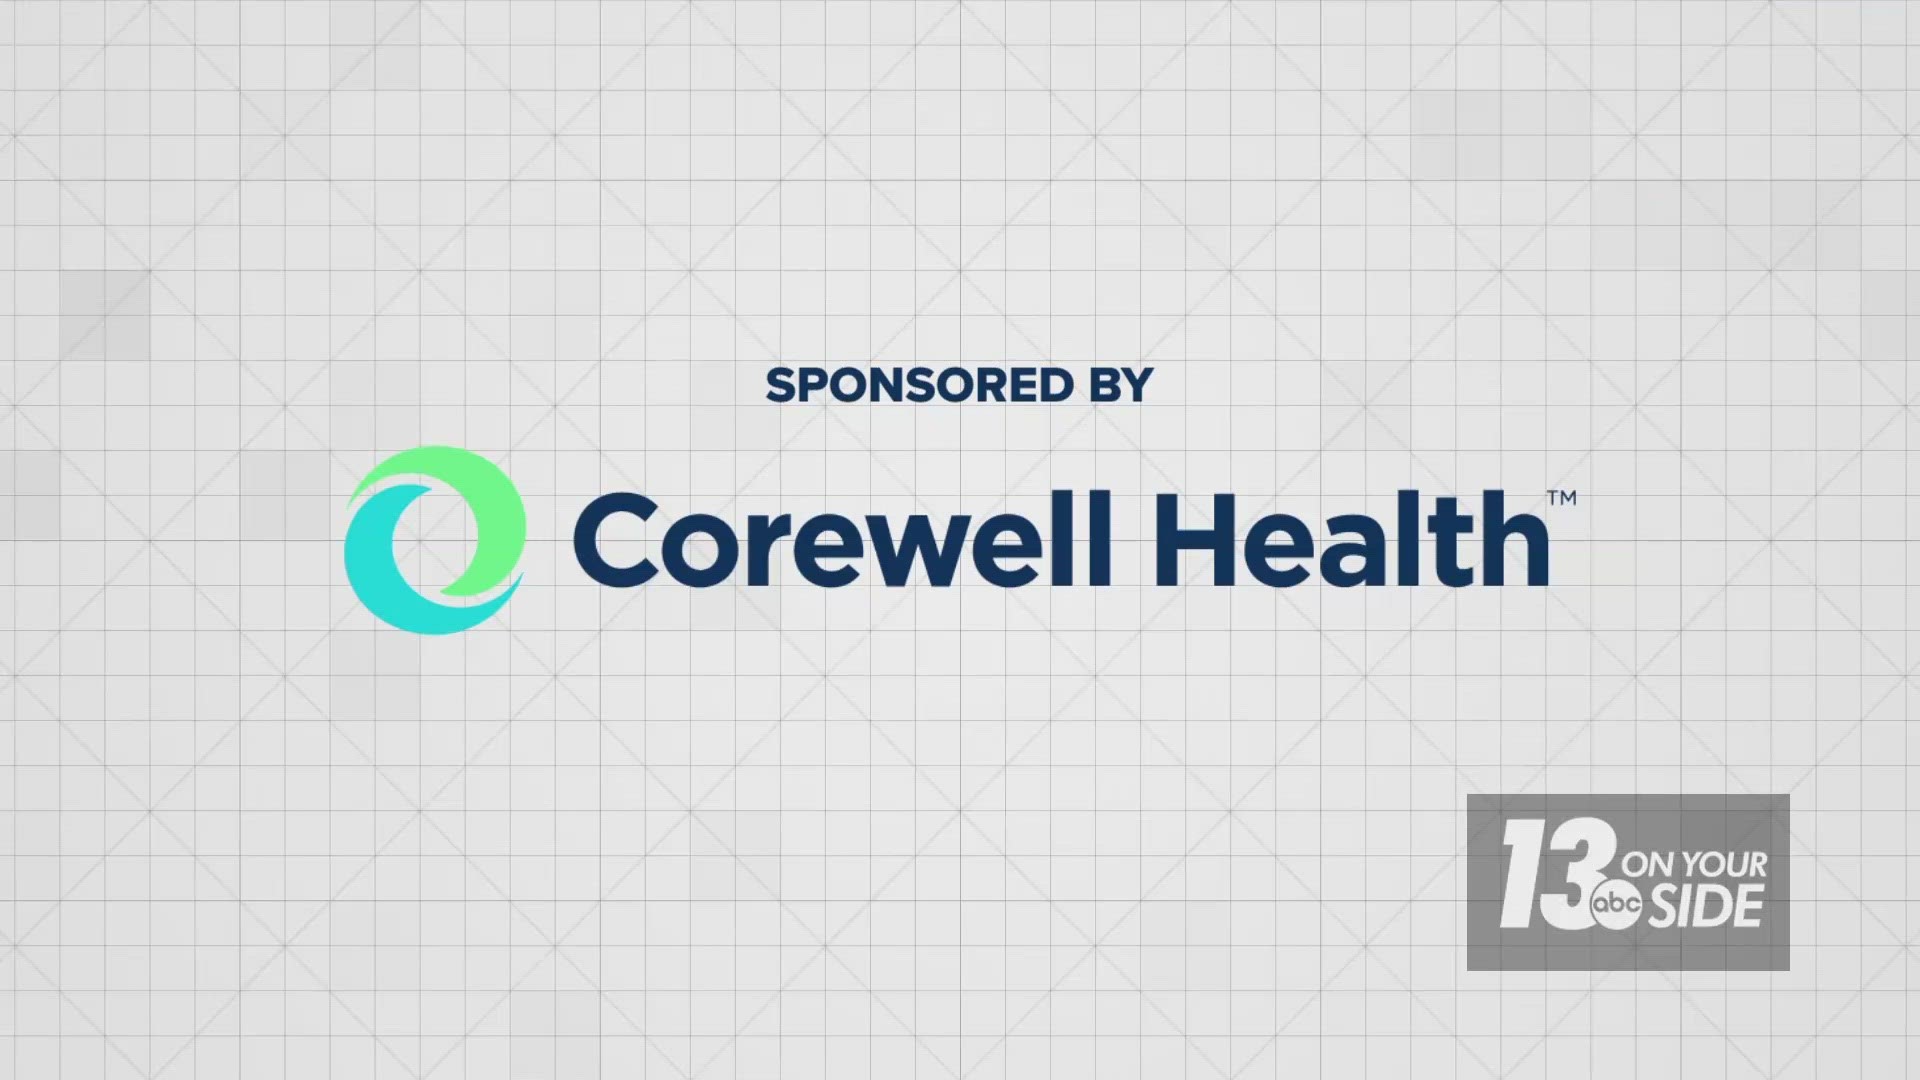 Helping these individuals lead better, more fulfilling lives is the goal of Corewell Health’s Pulmonary Rehabilitation program.